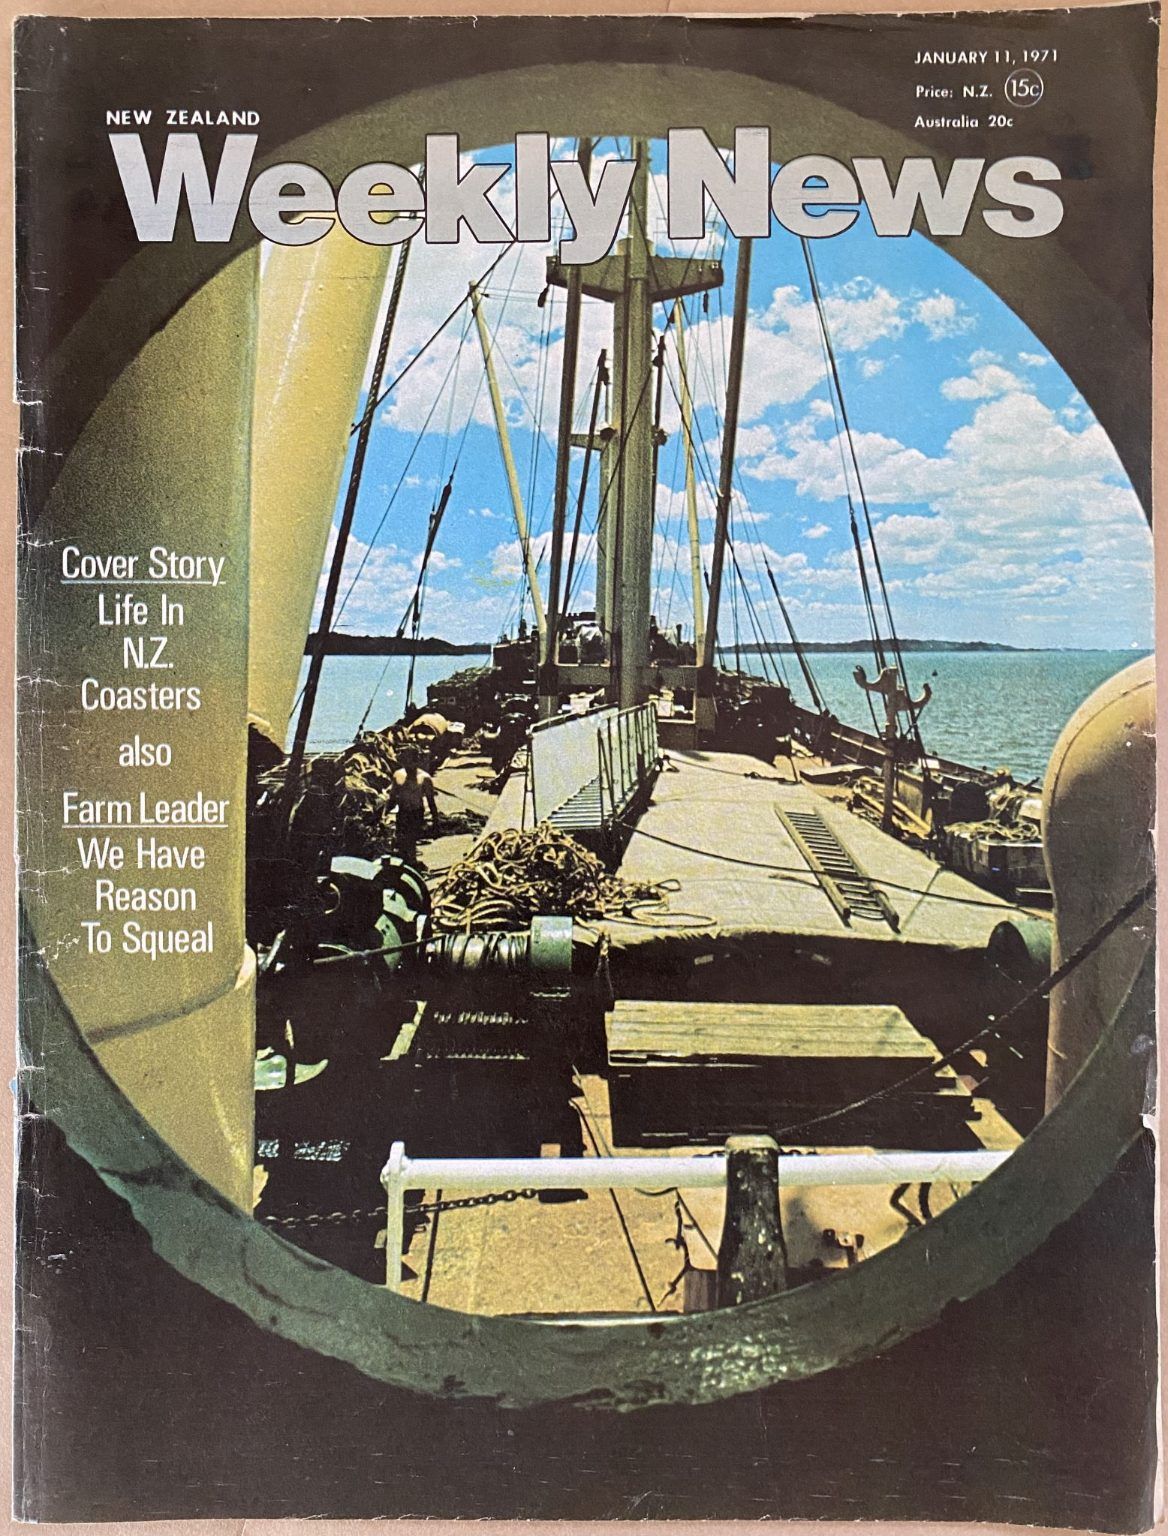 OLD NEWSPAPER: New Zealand Weekly News, No. 5588, 11 January 1971